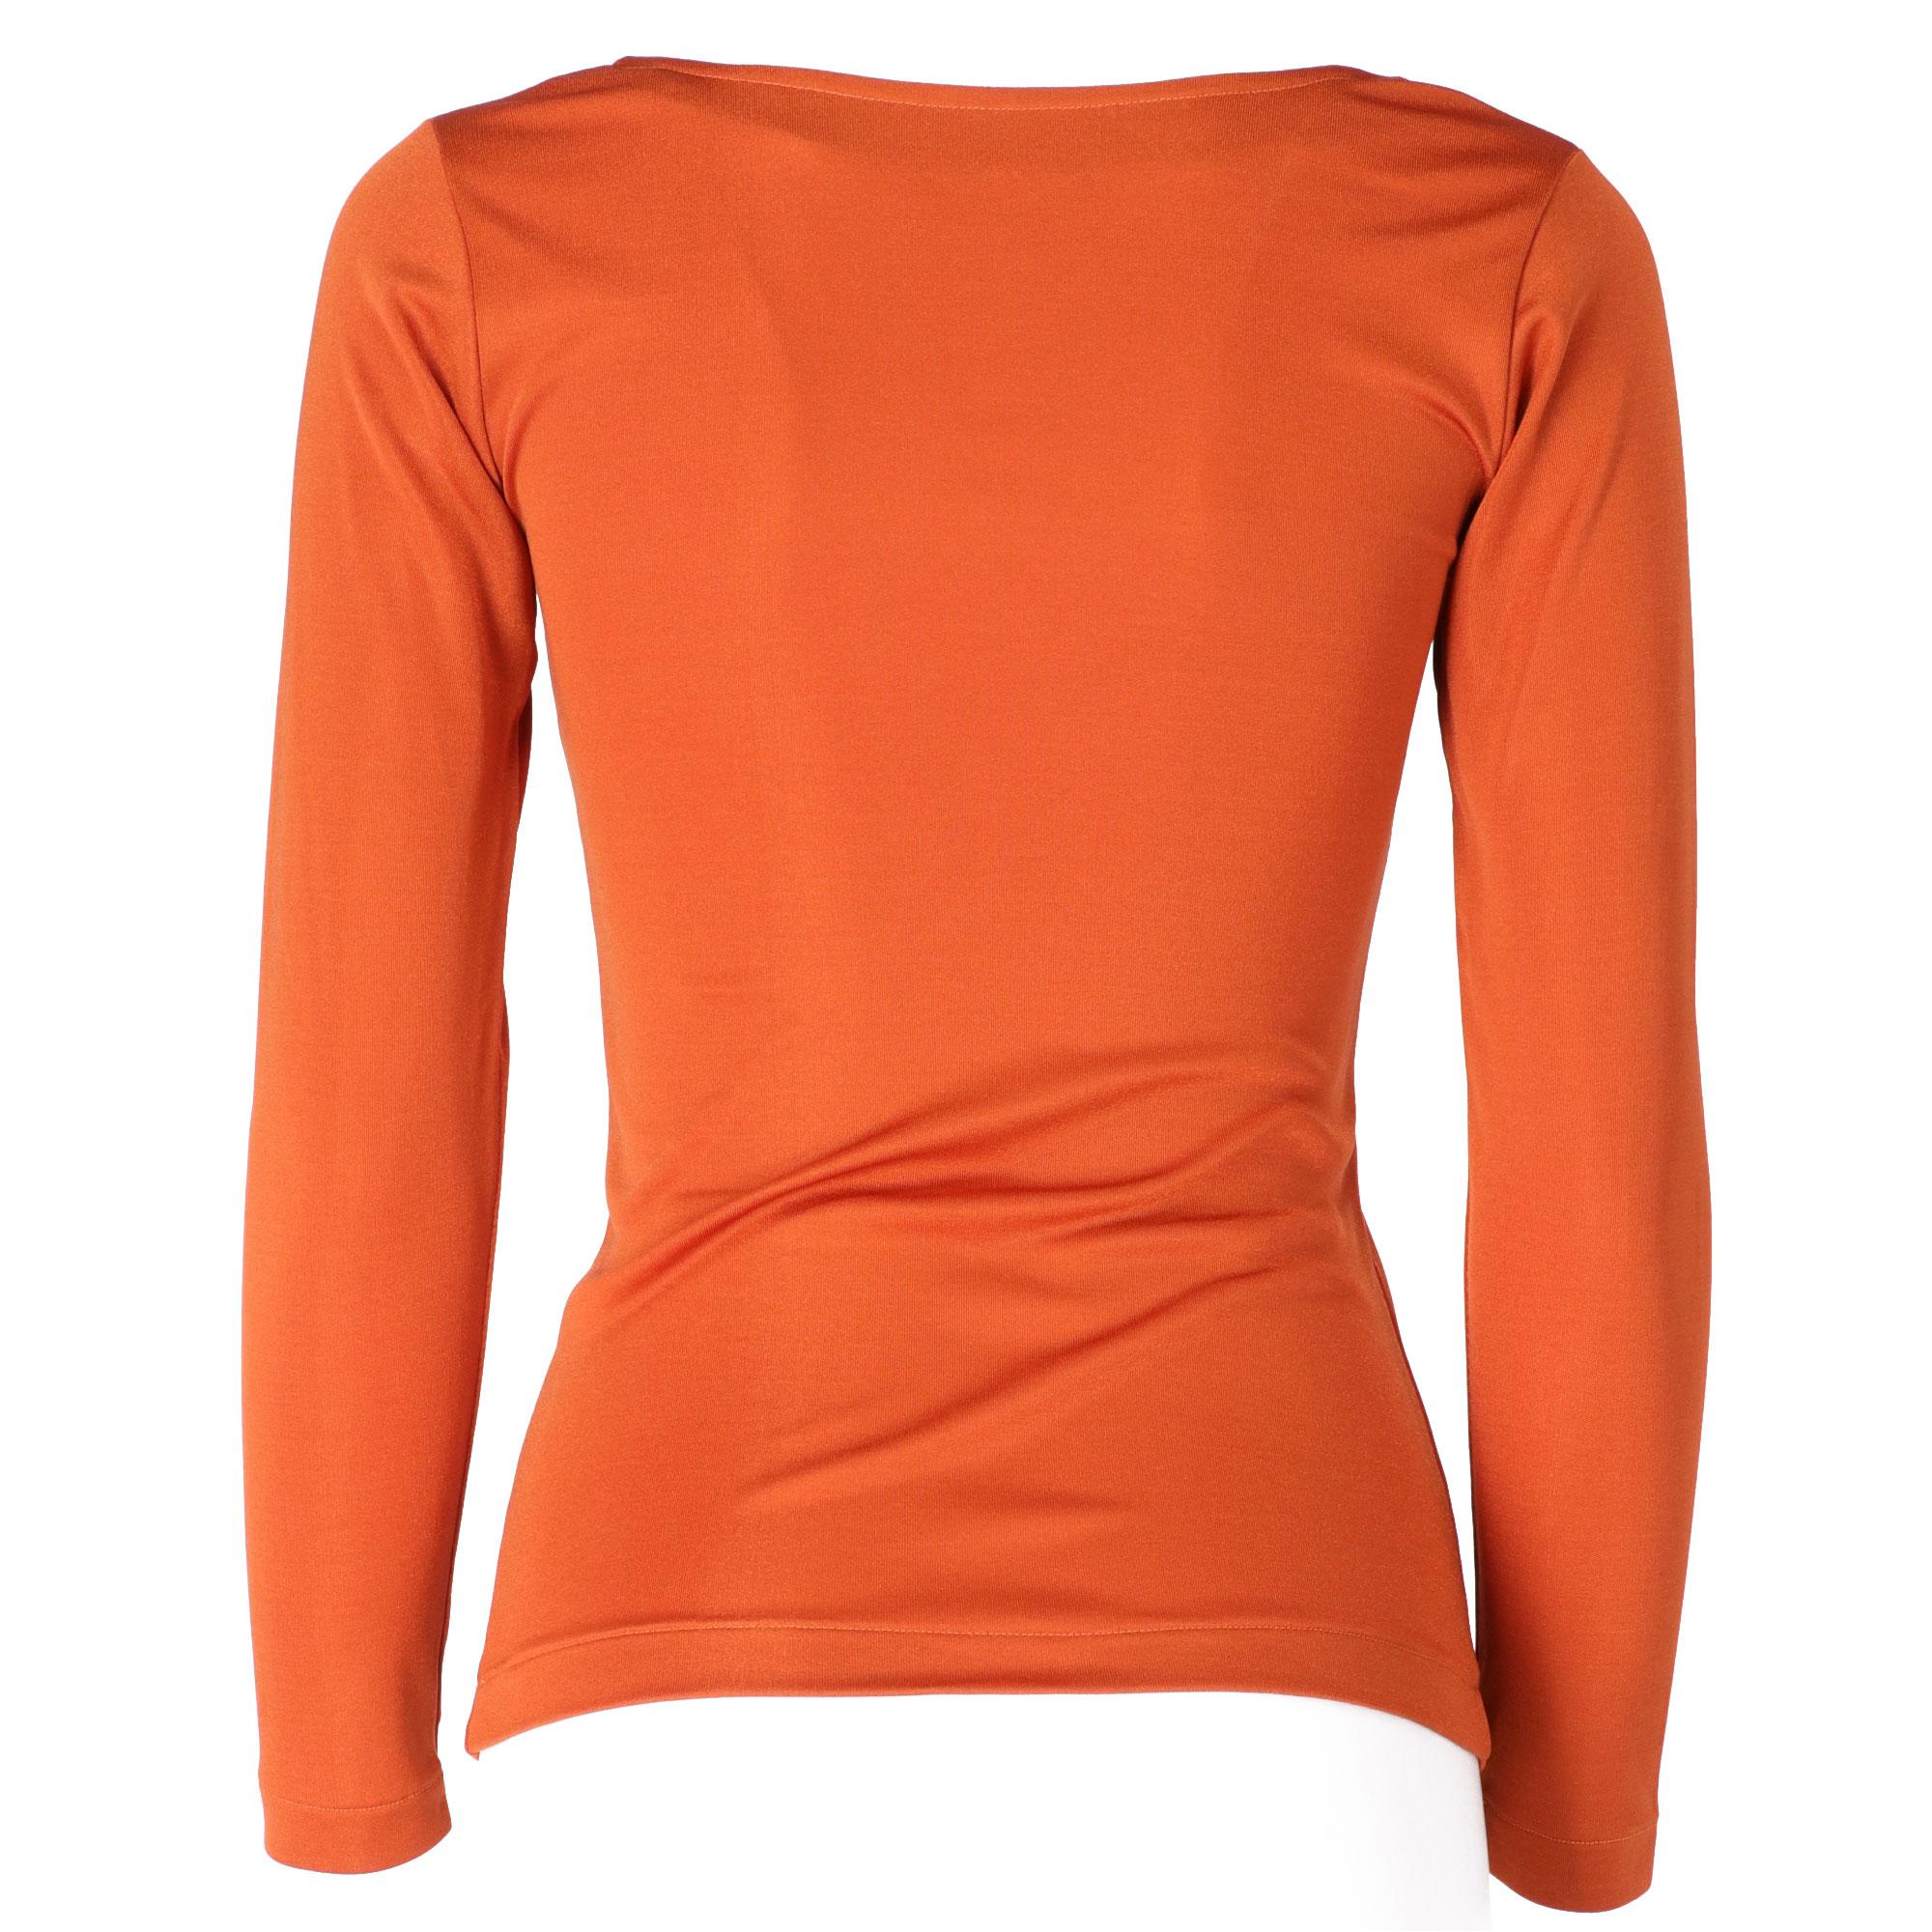 Red 1970s Yves Saint Laurent Rust-Colored Top